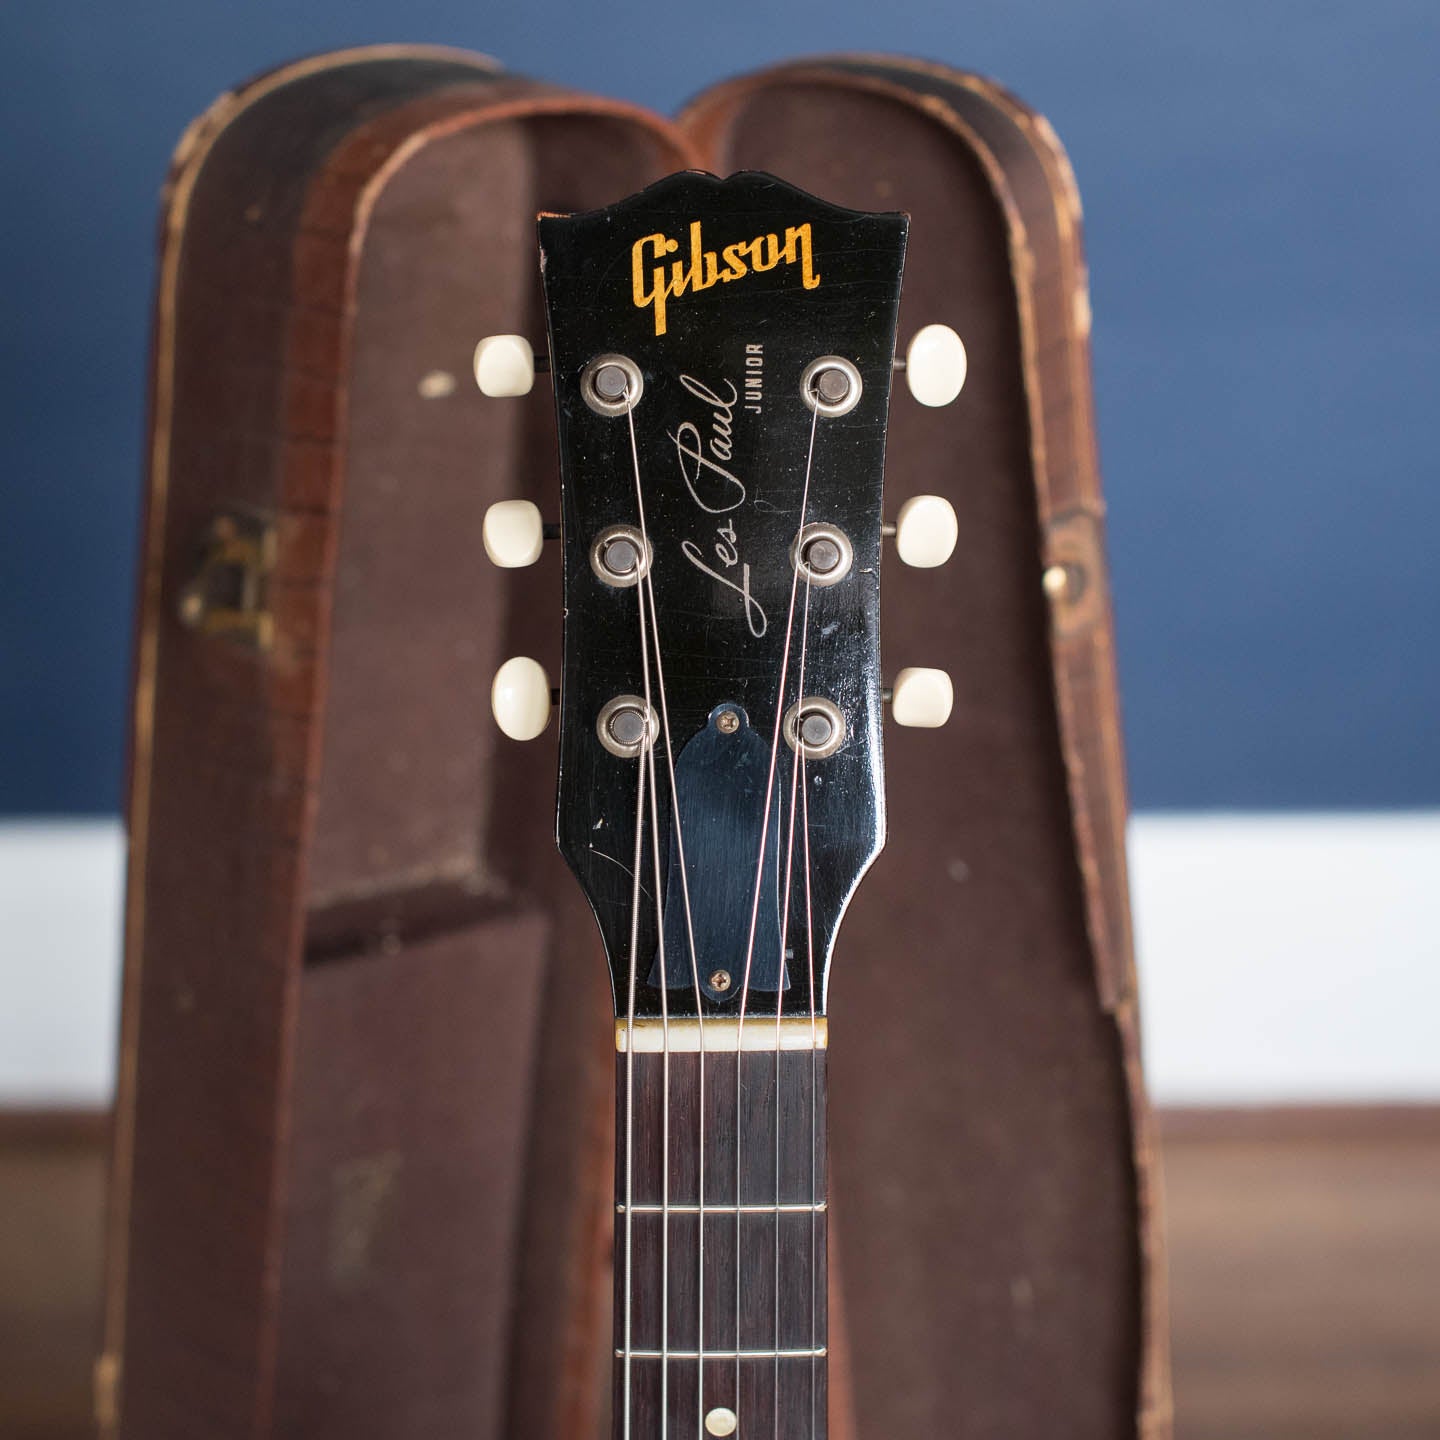 Where to sell vintage Gibson guitar